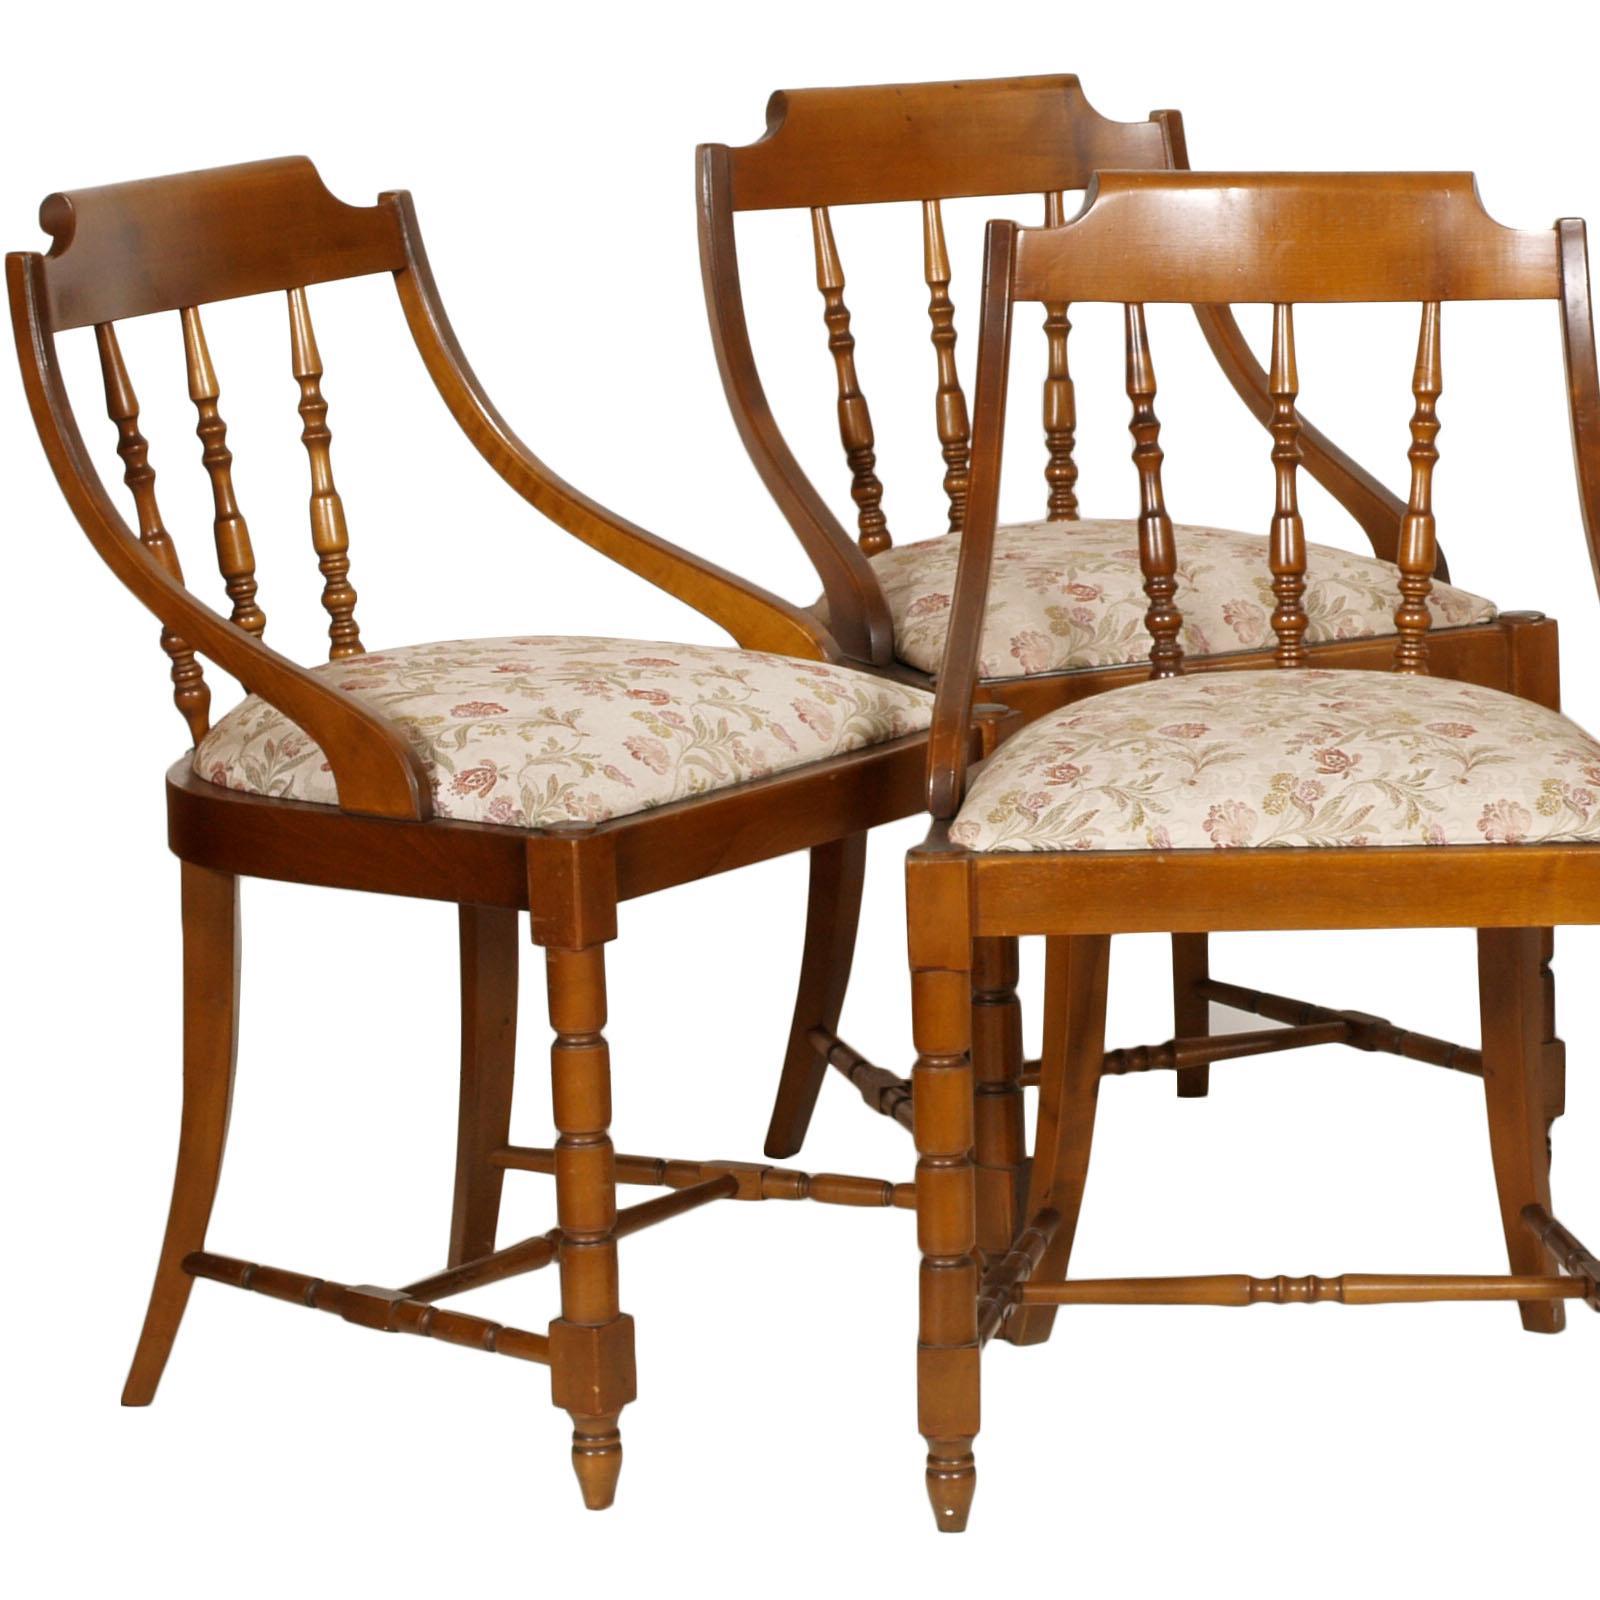 1950s, Italian six Gondola dinner chairs, country style, in solid walnut, with original upholstery sanitized, still usable 
With new custom upholstery, extra charge of 600 Euros

Measures cm: H 50/110, W 50, W 50.